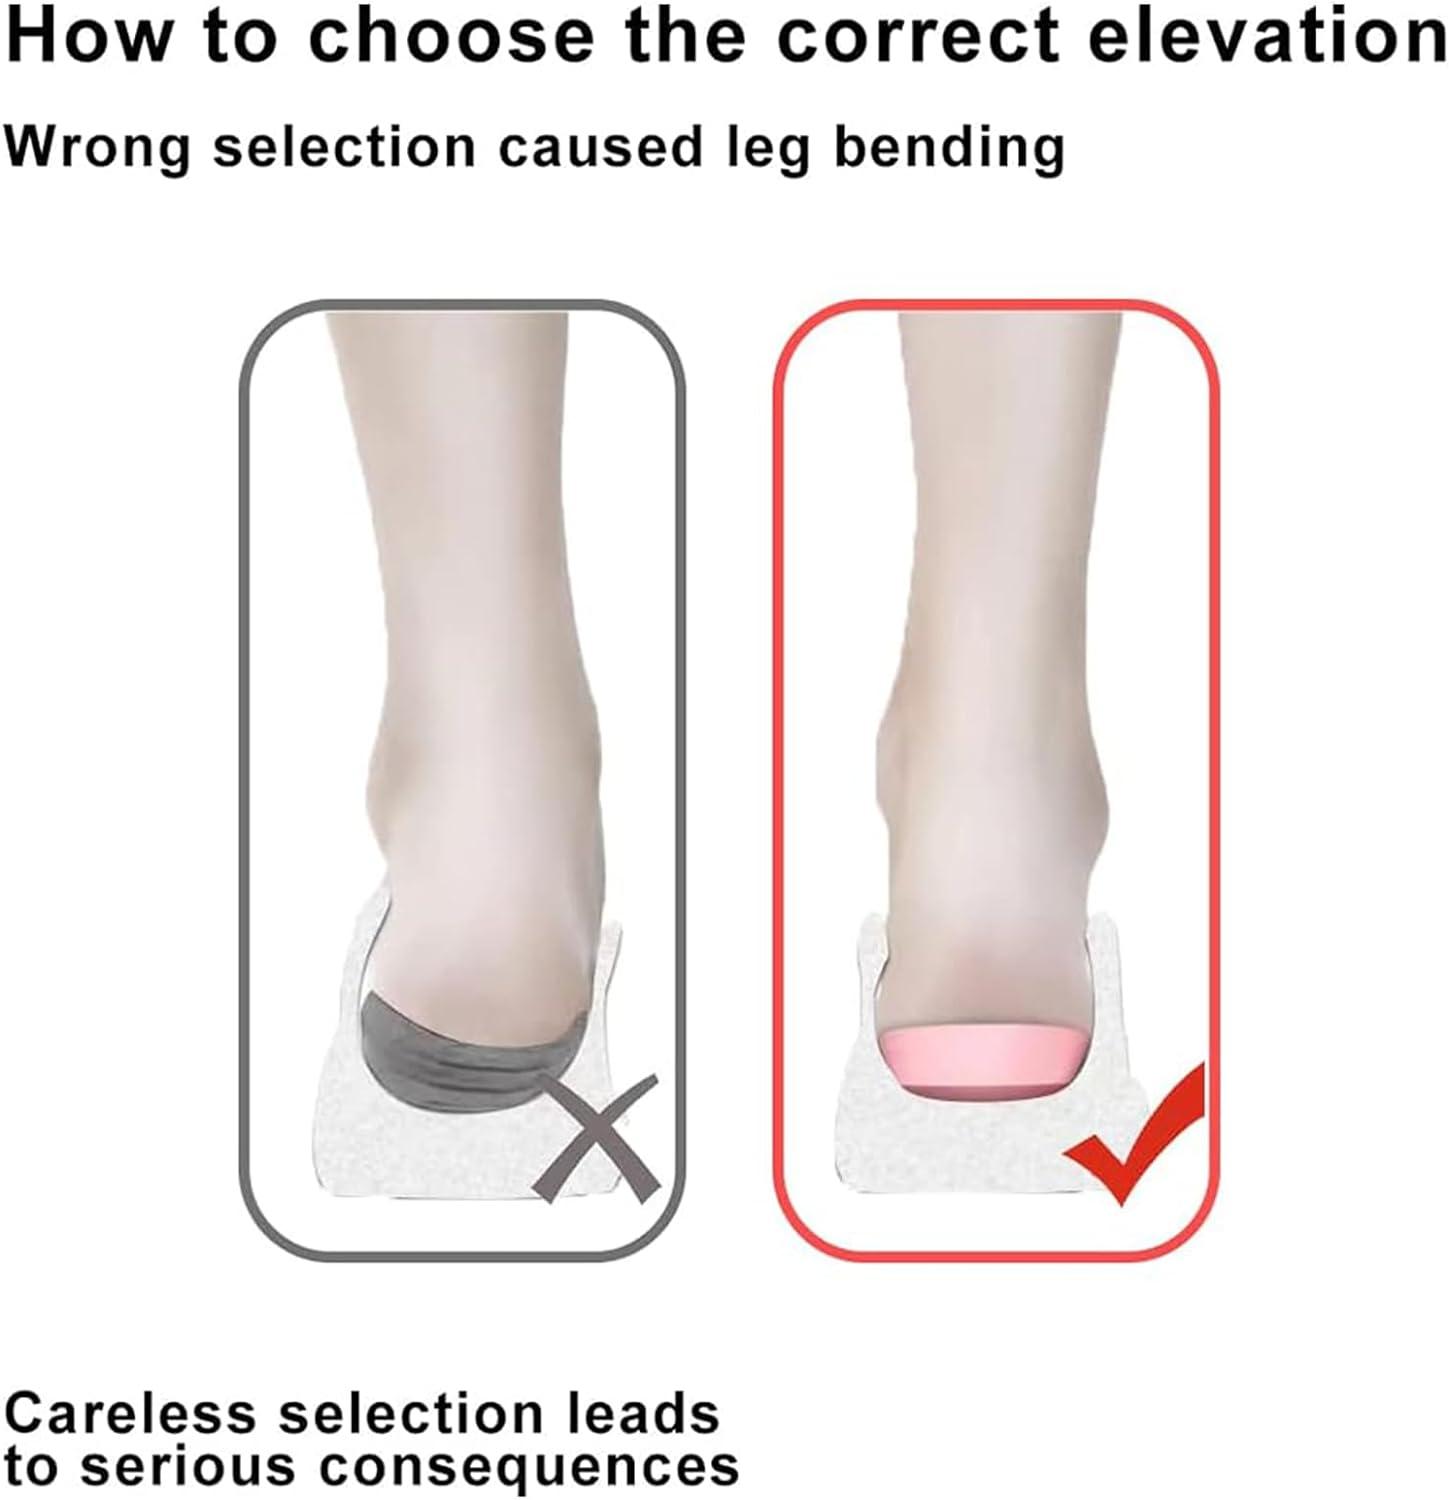 Heel Lift Inserts - 1.4 Inches Height Increase Insoles, Achilles